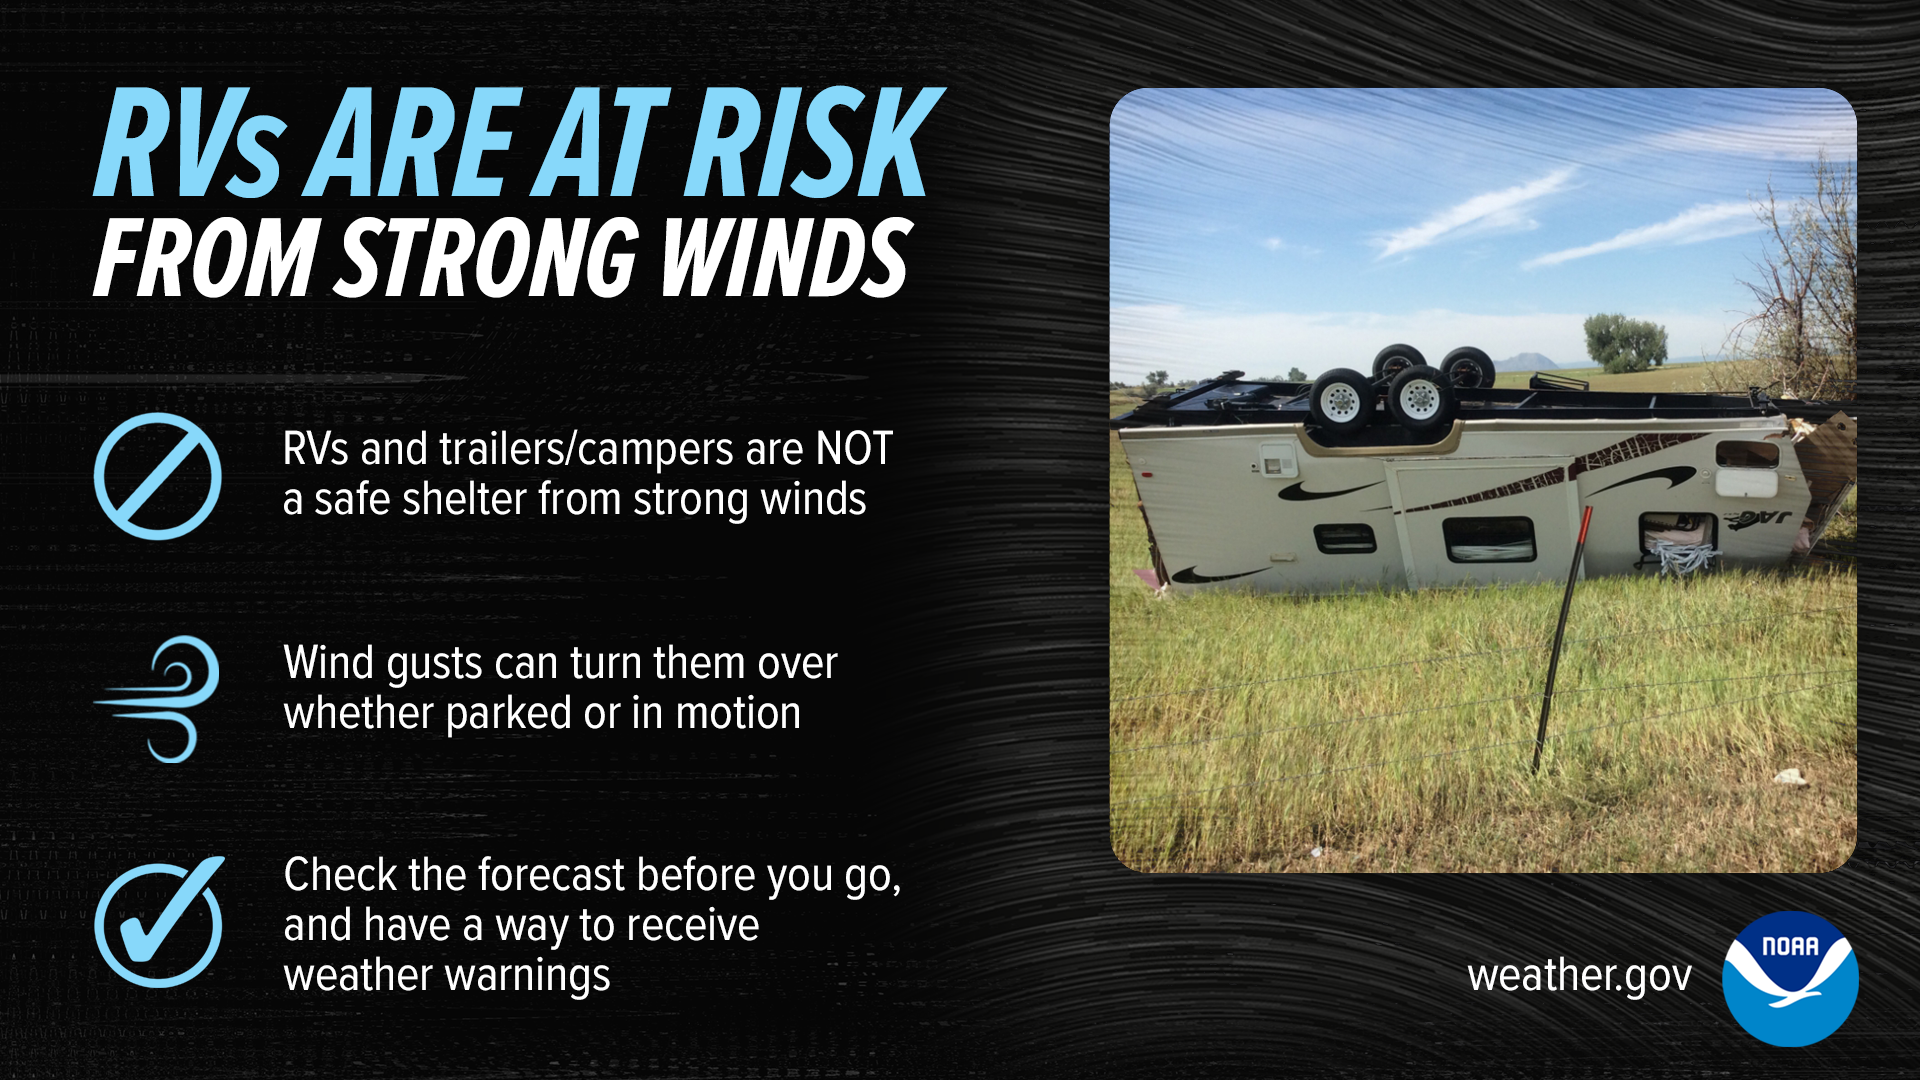 RVs are at risk from strong winds. RVs and trailers/campers are not a safe shetler from strong winds. Wind gusts can turn them over whether parked or in motion. Check the forecast before you go, and have a way to receive weather warnings.